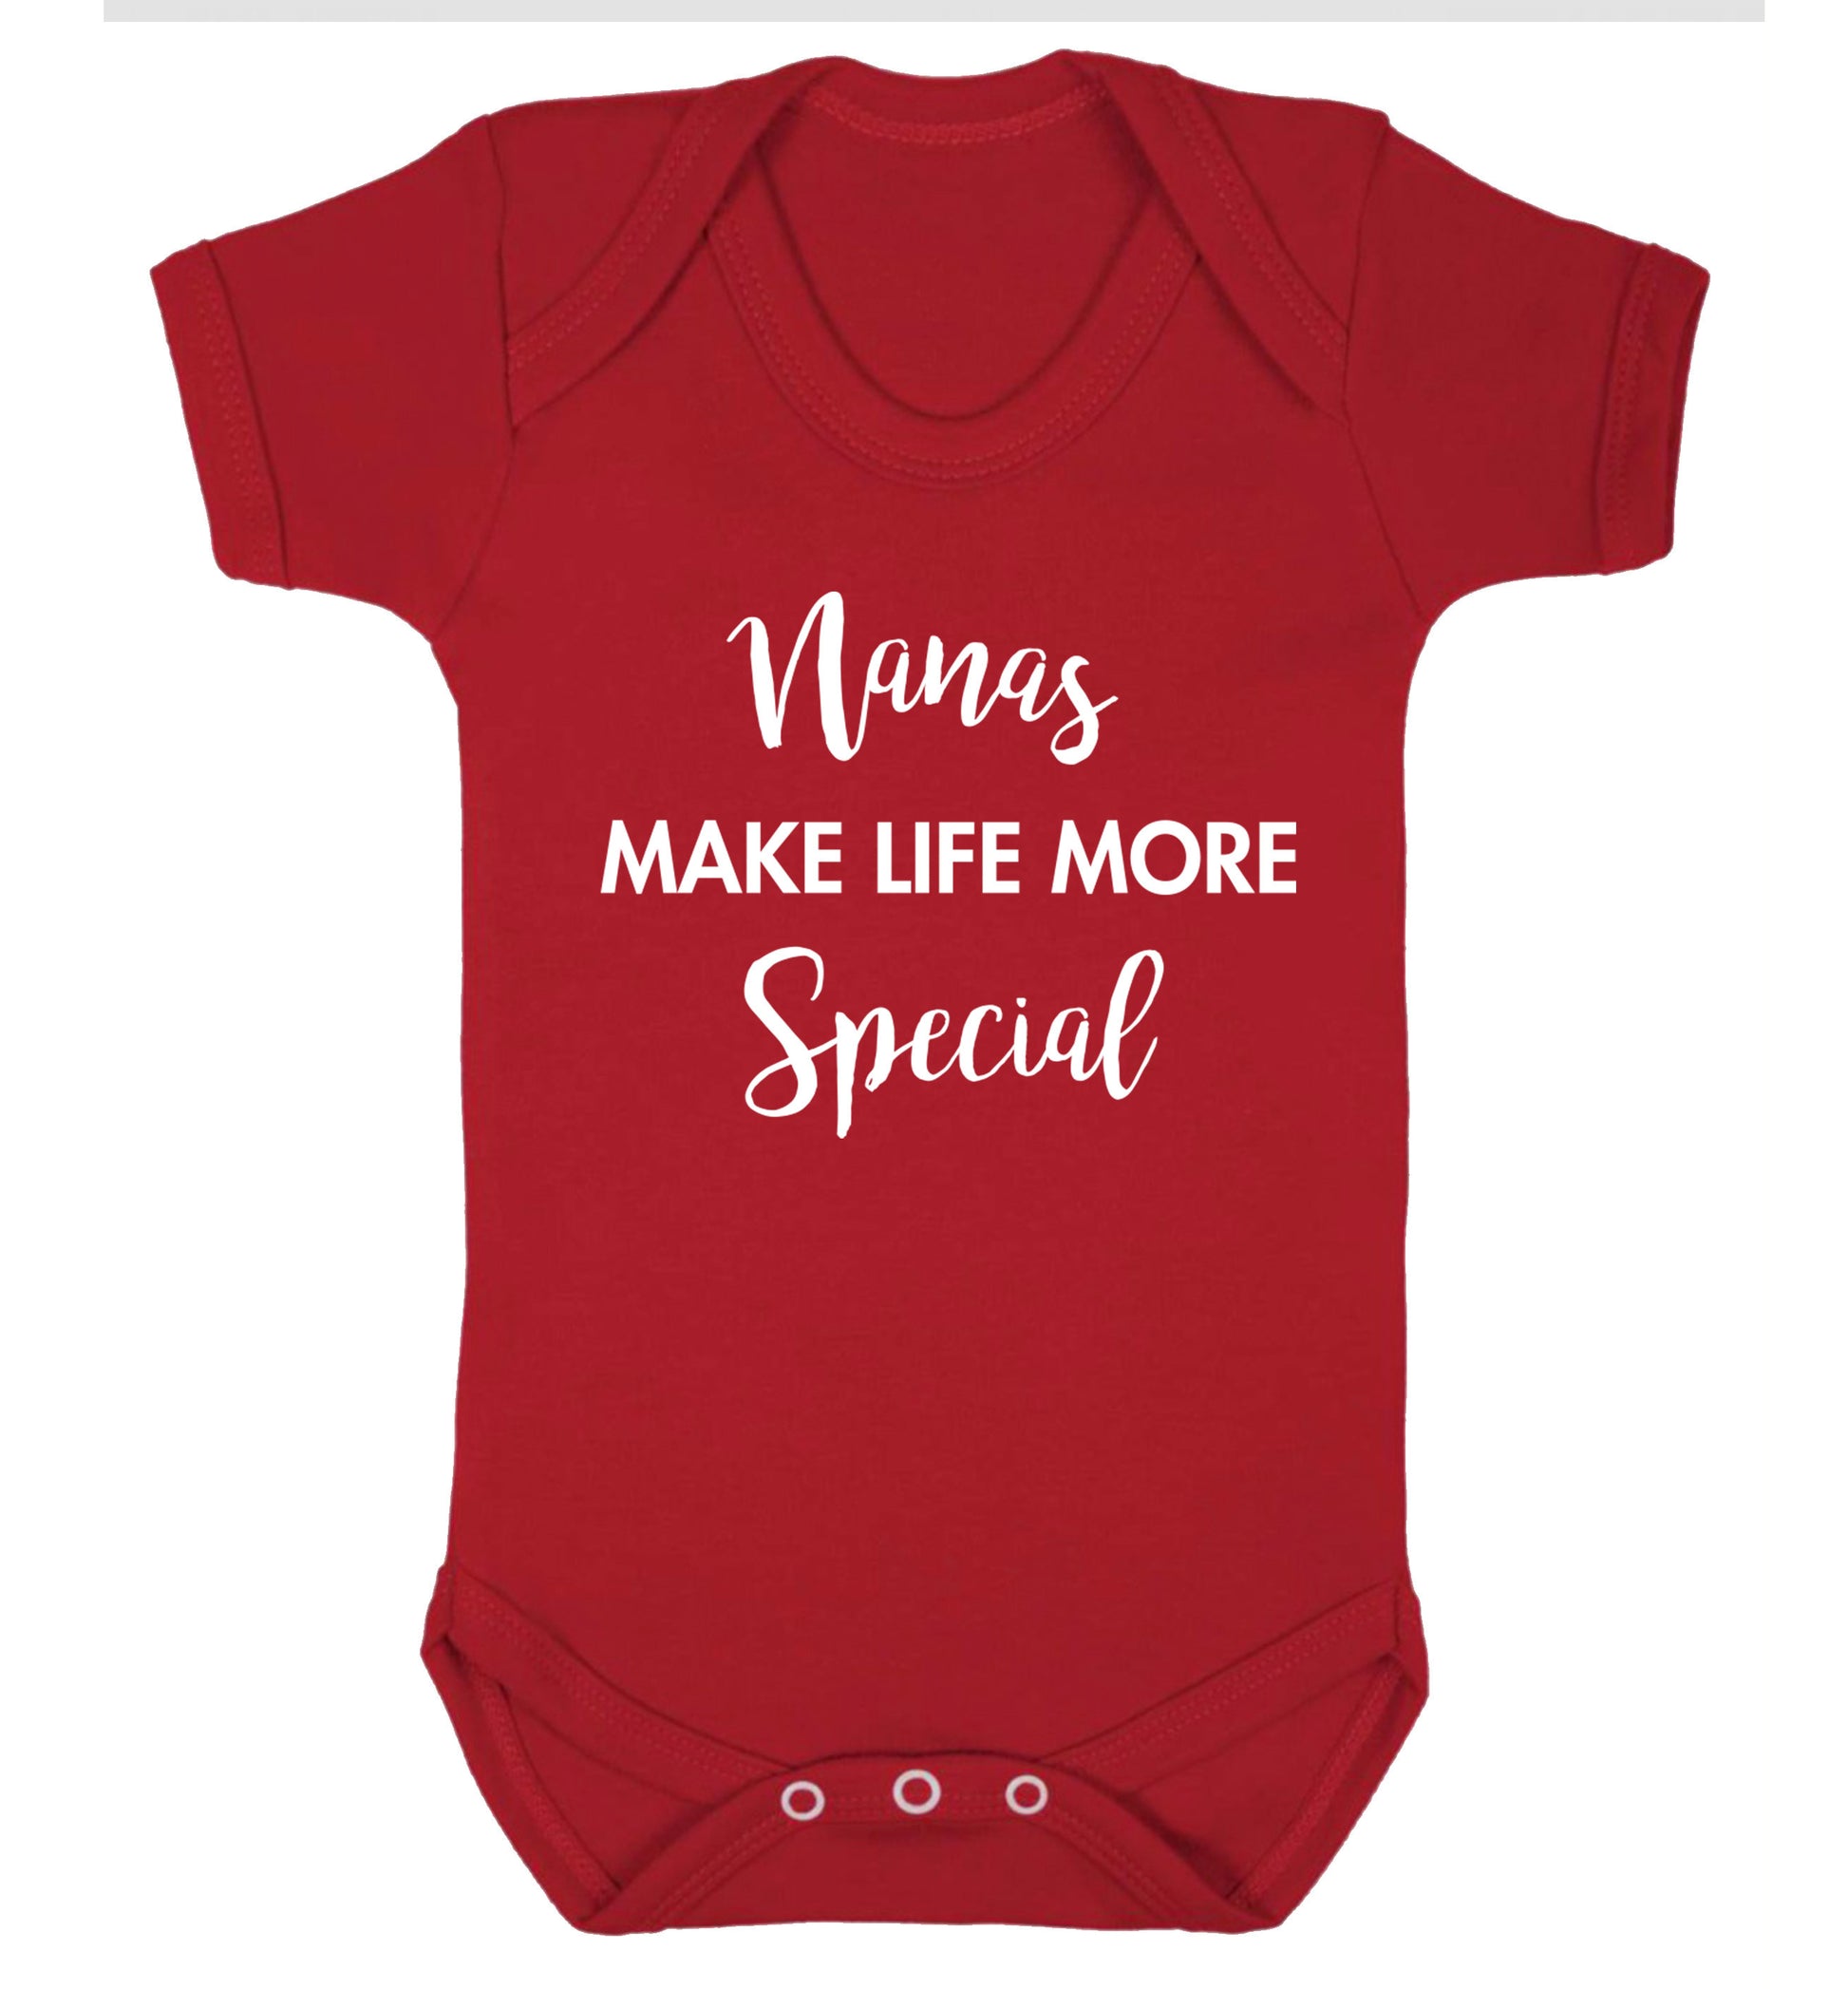 Nanas make life more special Baby Vest red 18-24 months